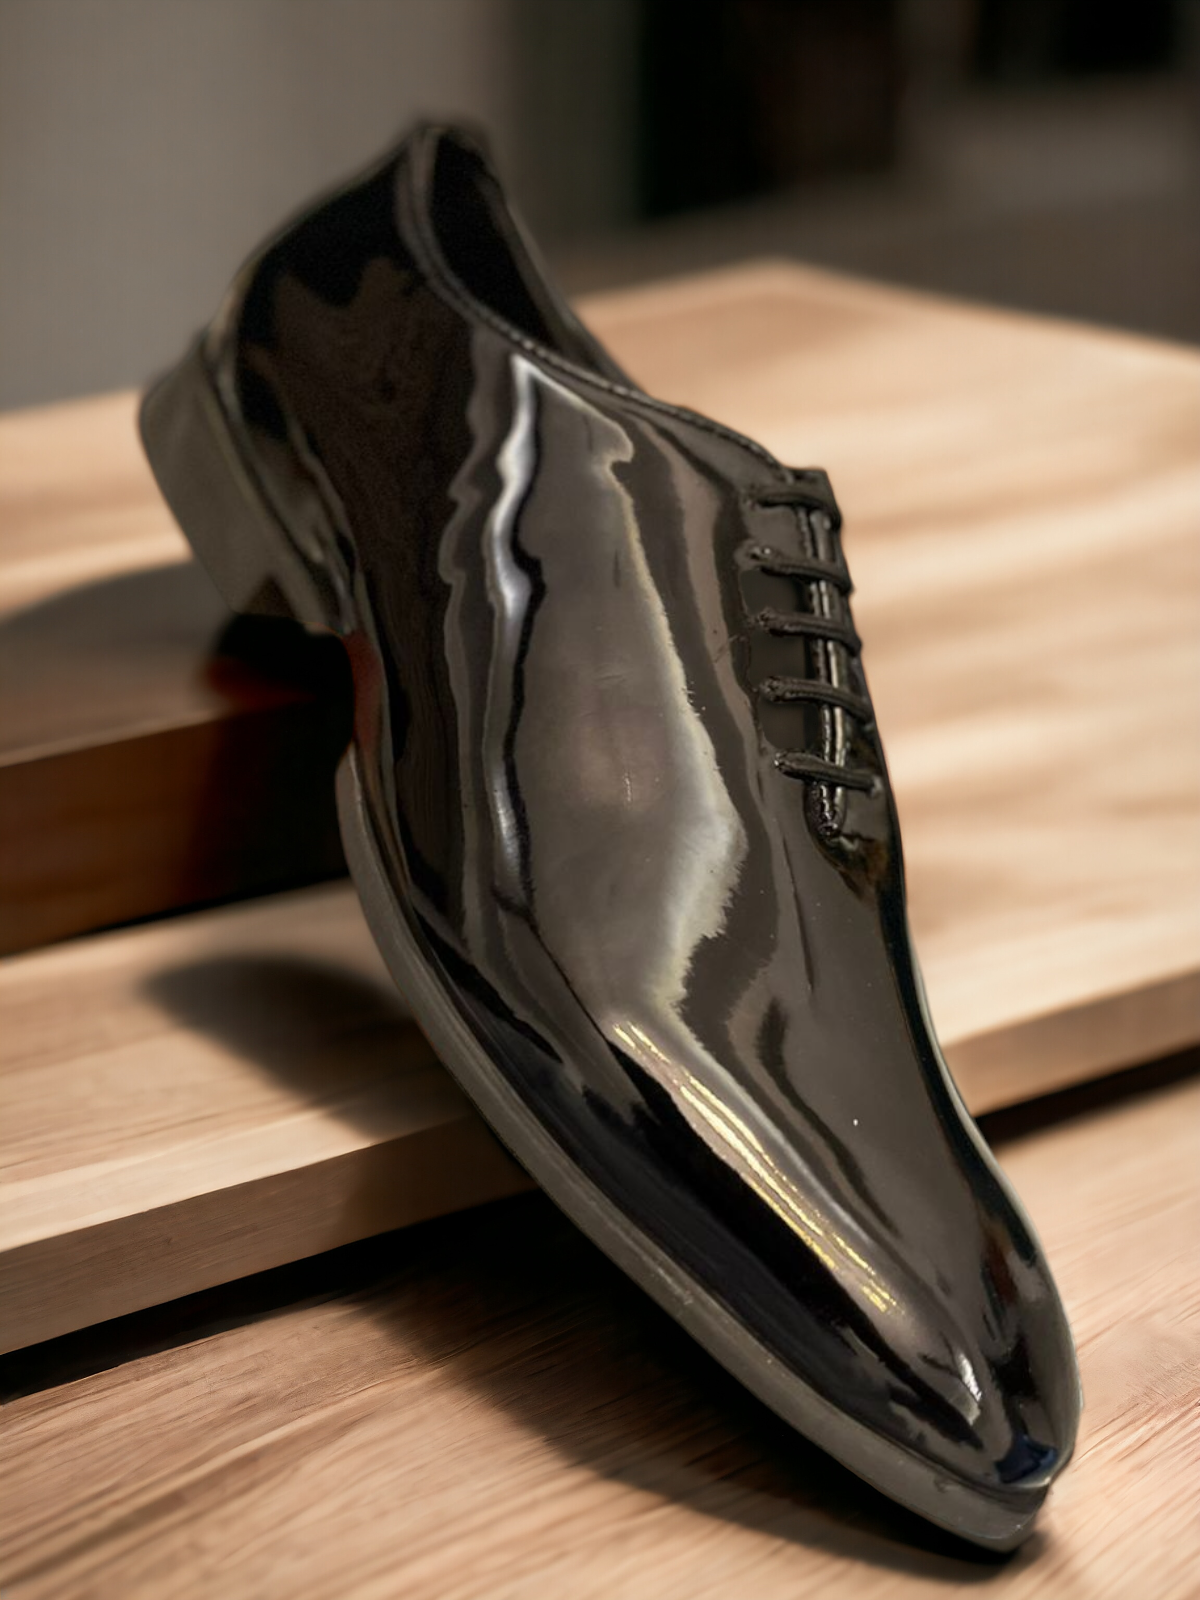 Shiny Oxford Lace-up Shoes Elevate Your Formal Style from Business to Black-Tie